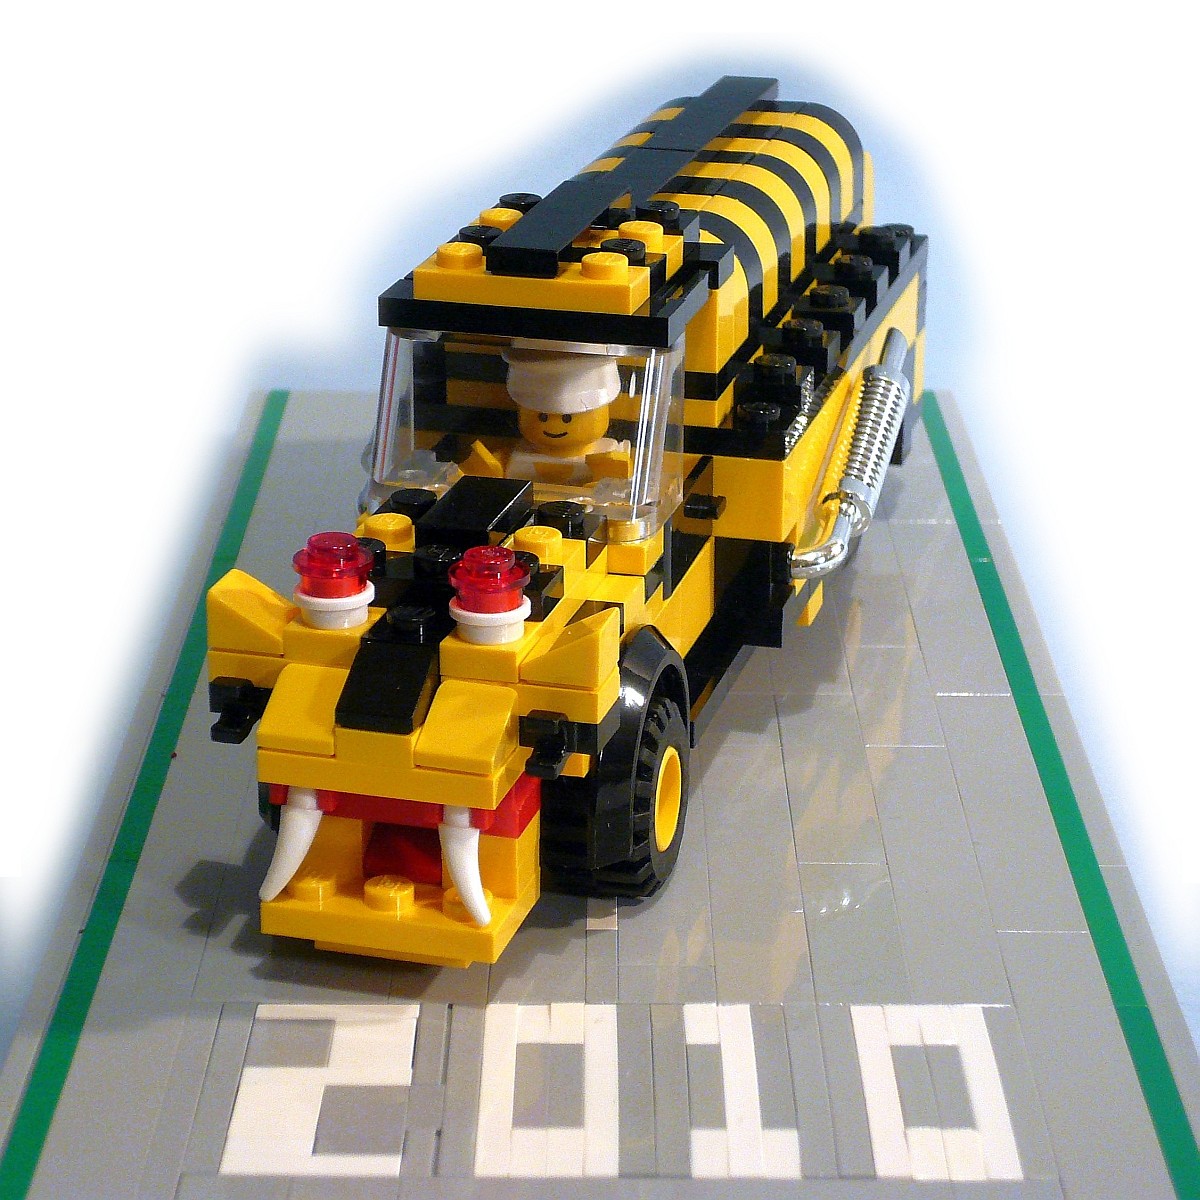 LEGO Year of the Tiger